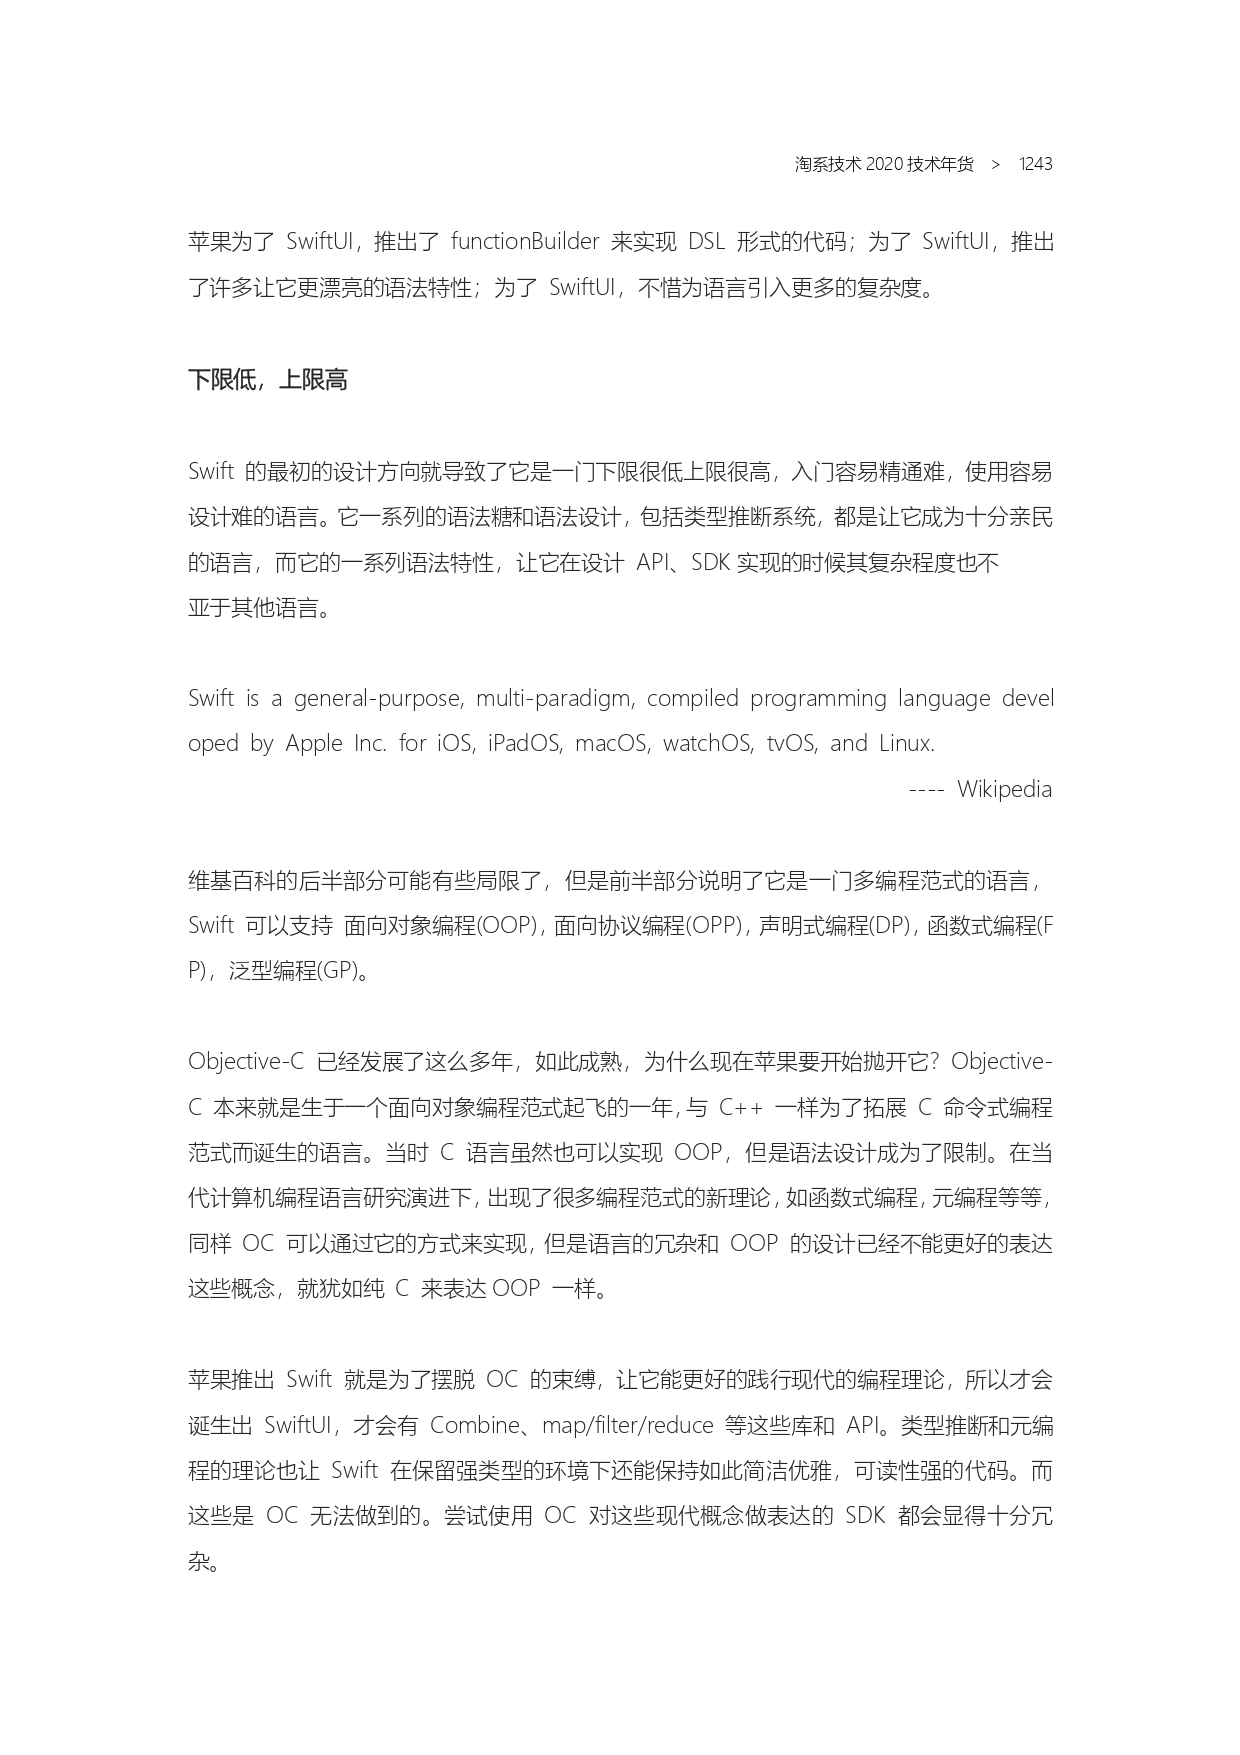 The Complete Works of Tao Technology 2020-1239-1312_page-0005.jpg